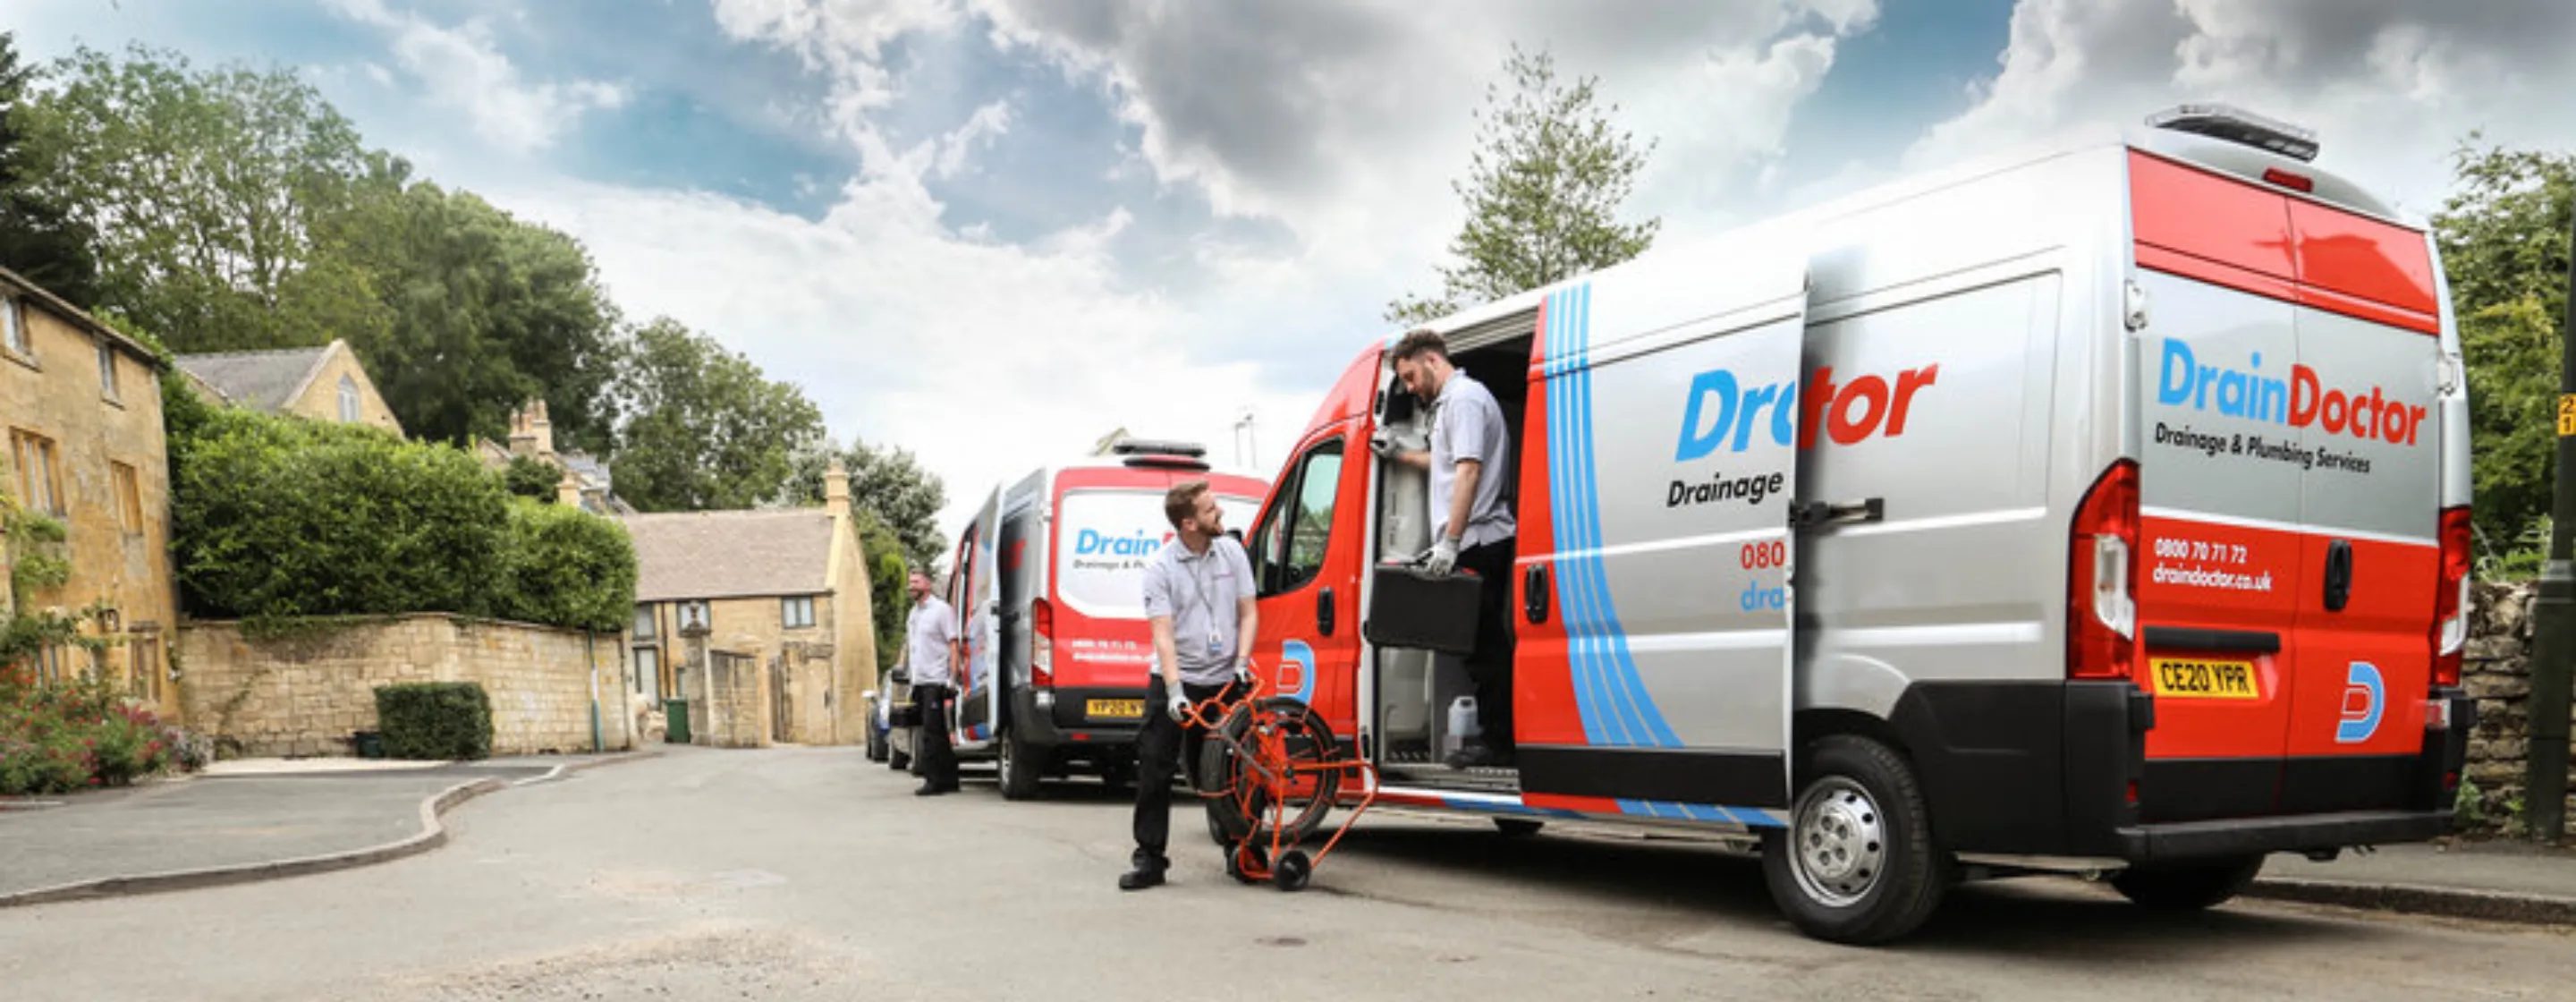 Drain Doctor branded trucks and technicians.